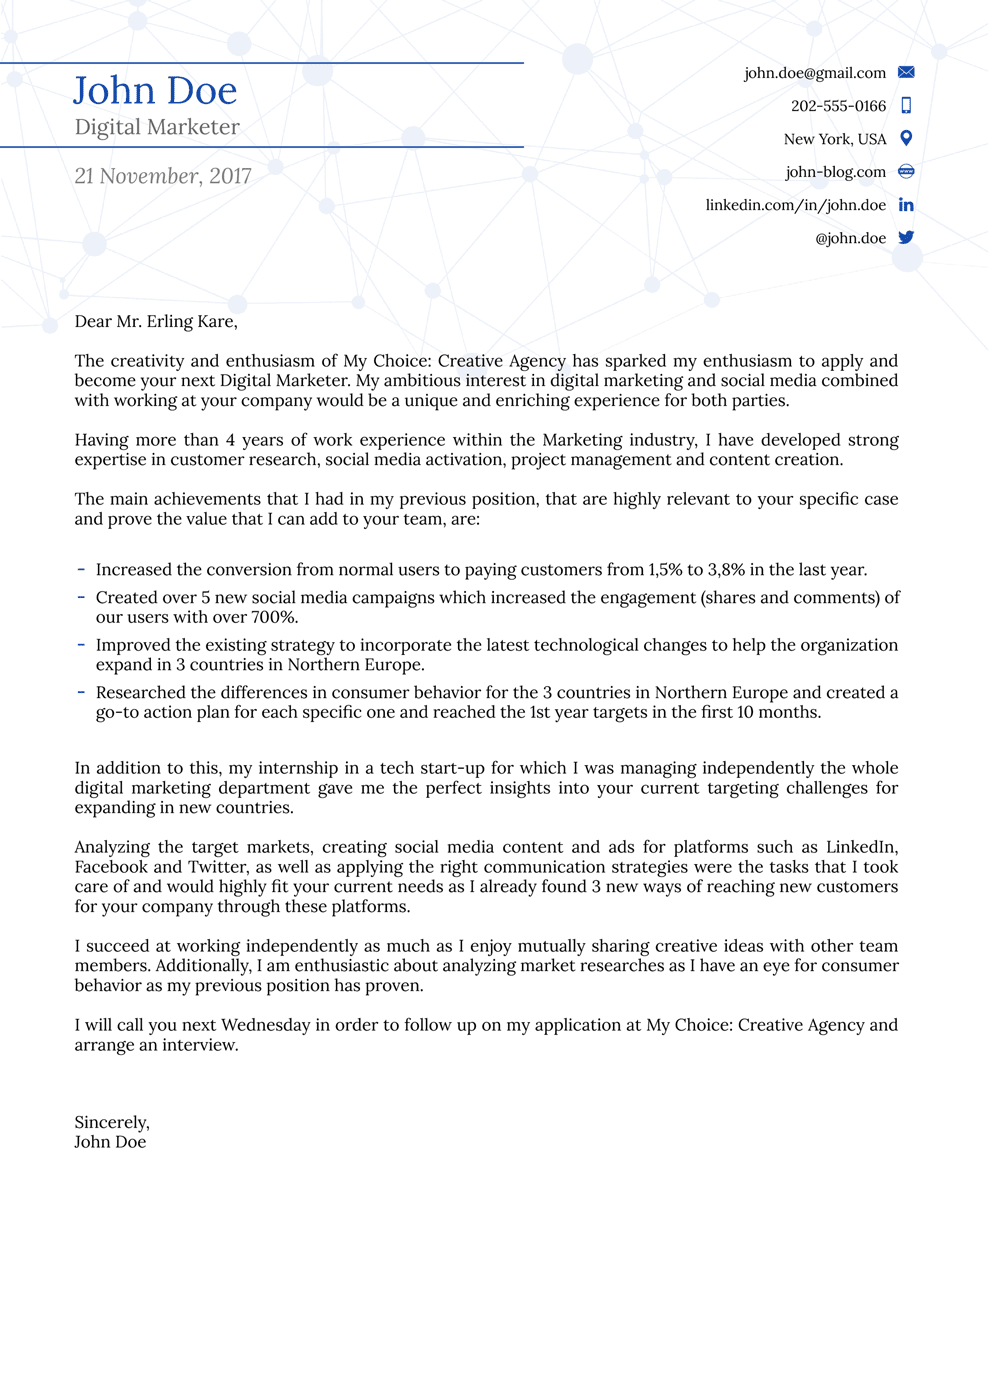 College Cover Letter Template